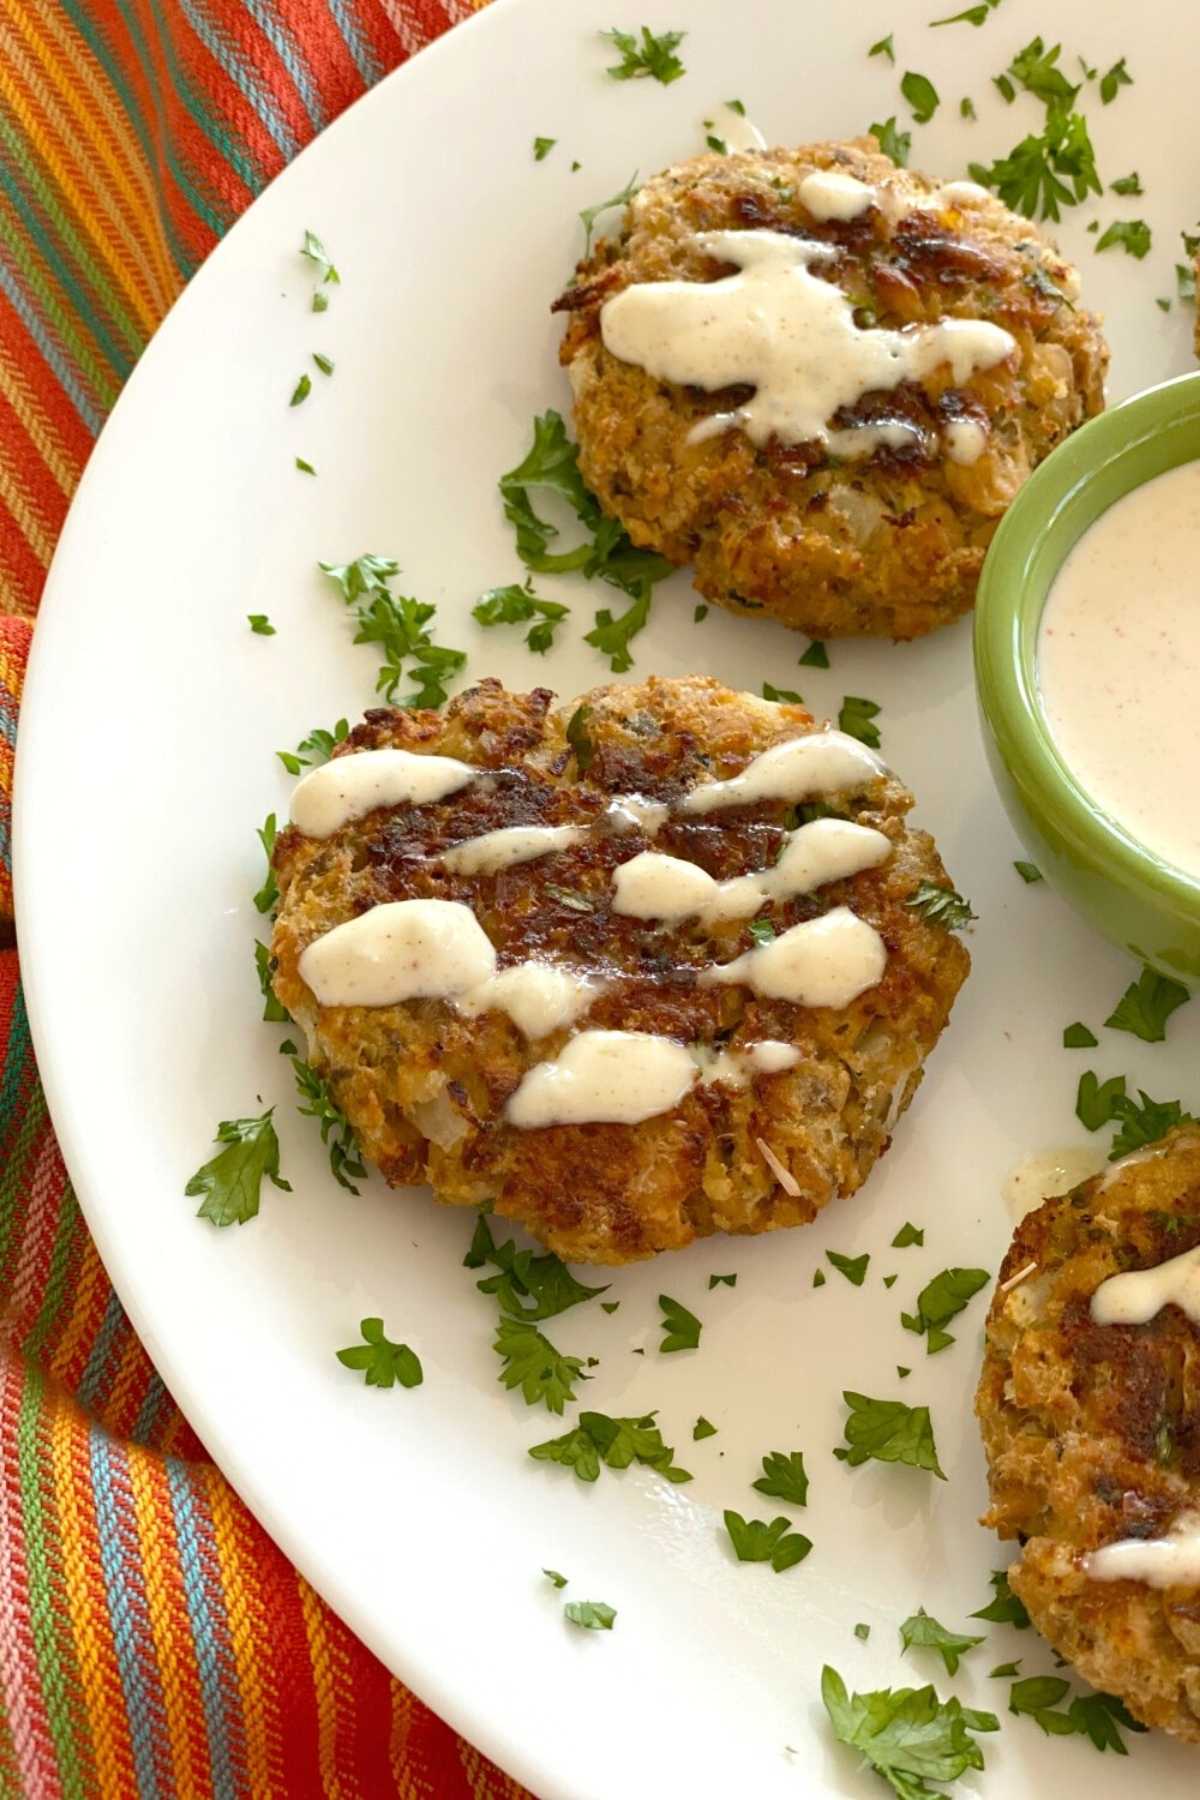 Three baked salmon patties drizzled with aioli on a plate with a bowl in the middle.